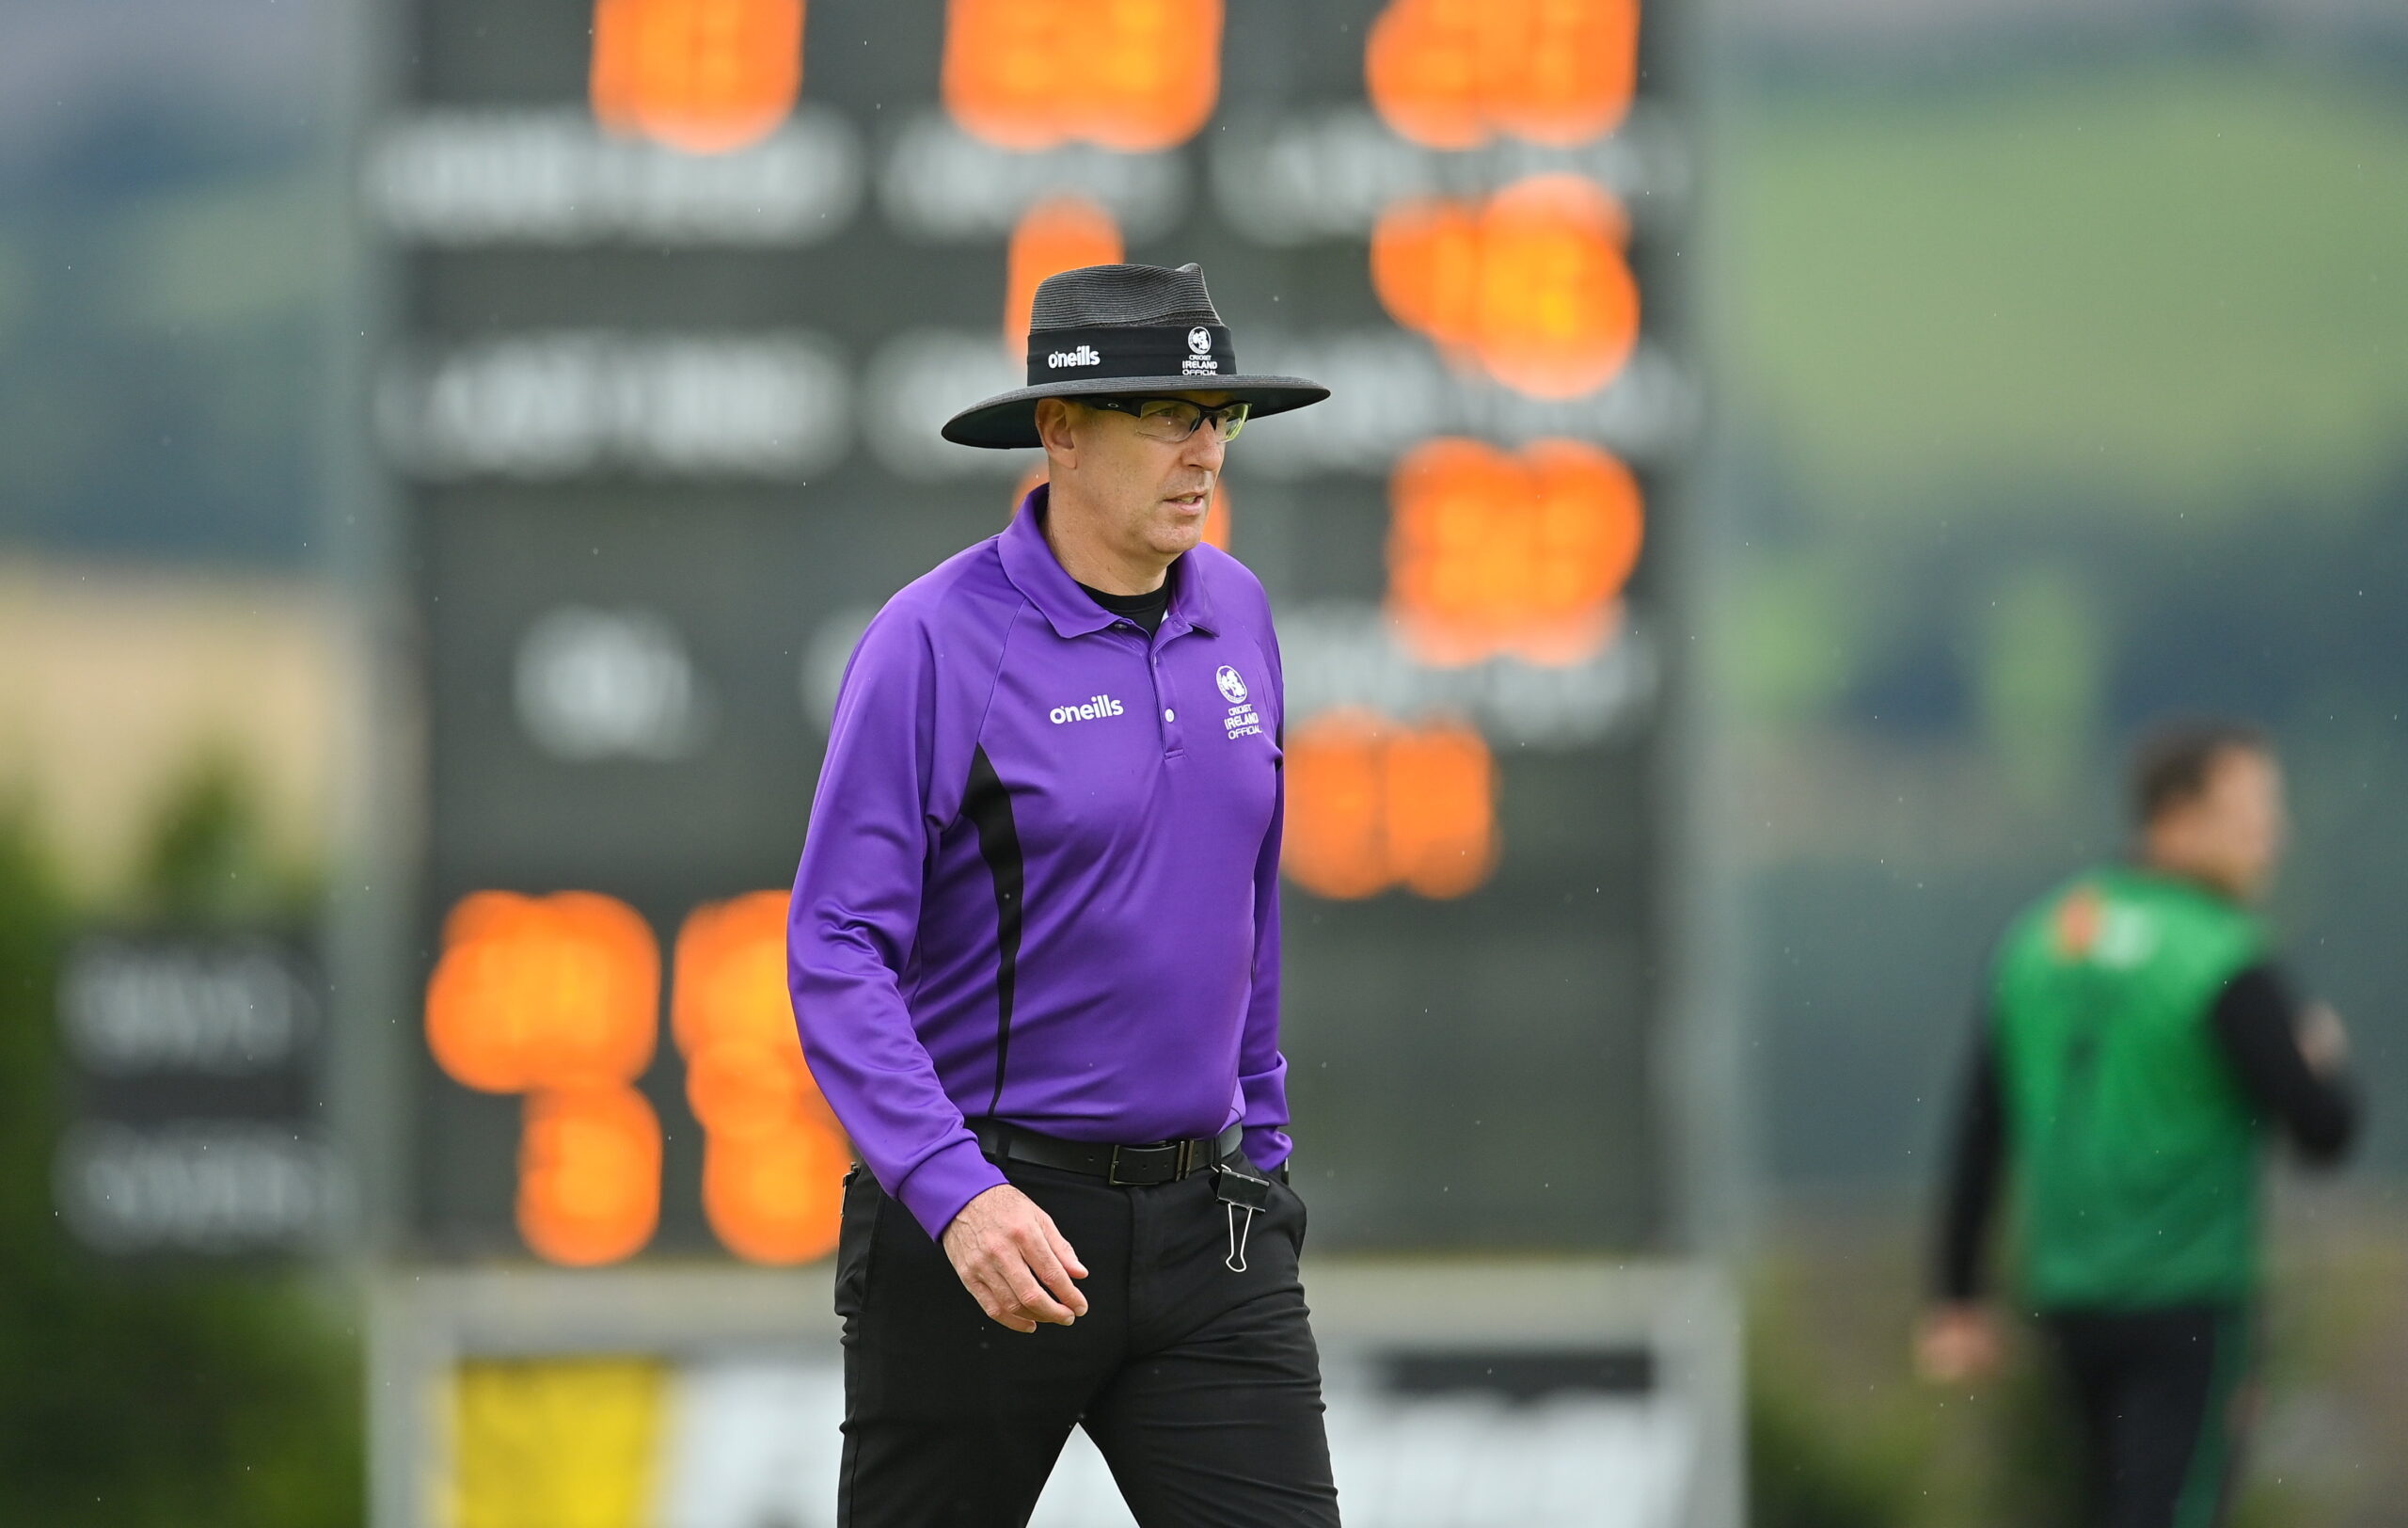 Cricket Ireland: Roly Black - “At this level there is always going to be scrutiny and pressure in what you do”